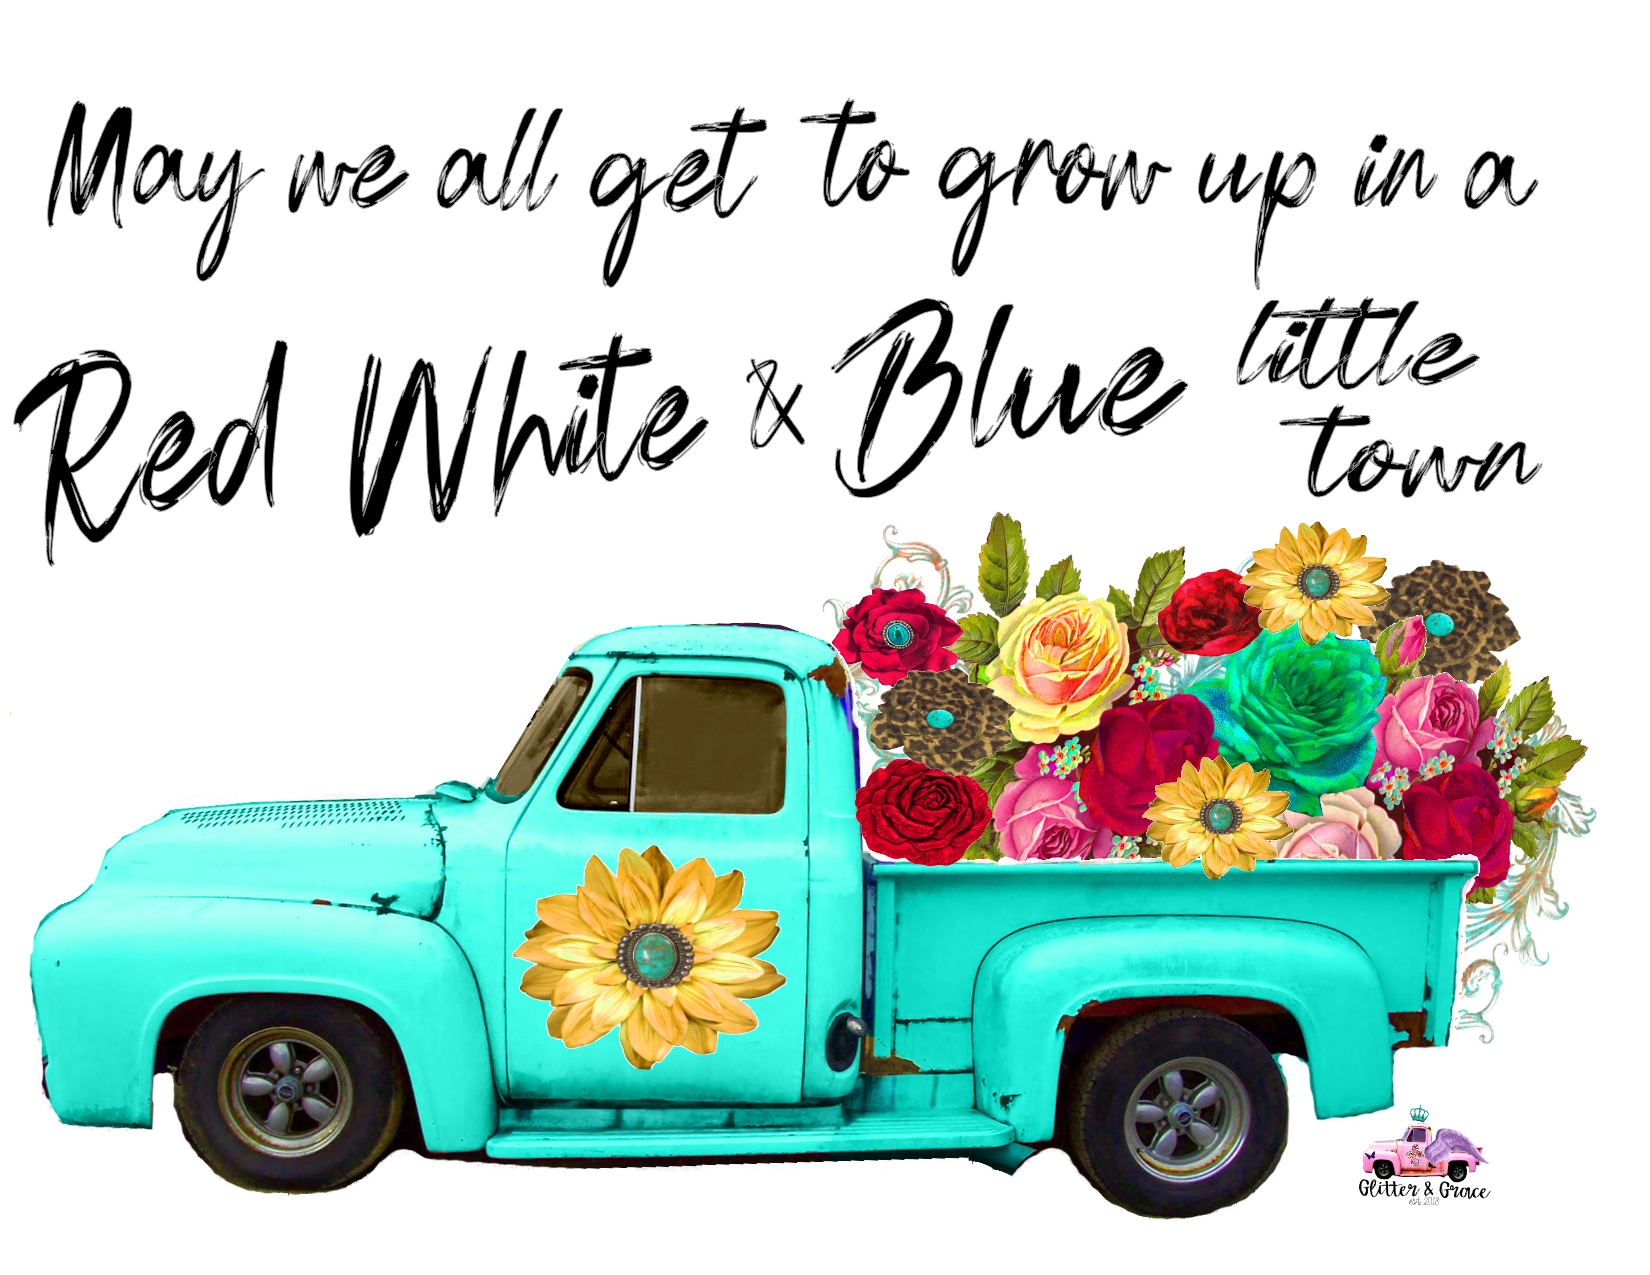 #402 May we all get to grow up in a Red White & Blue little town